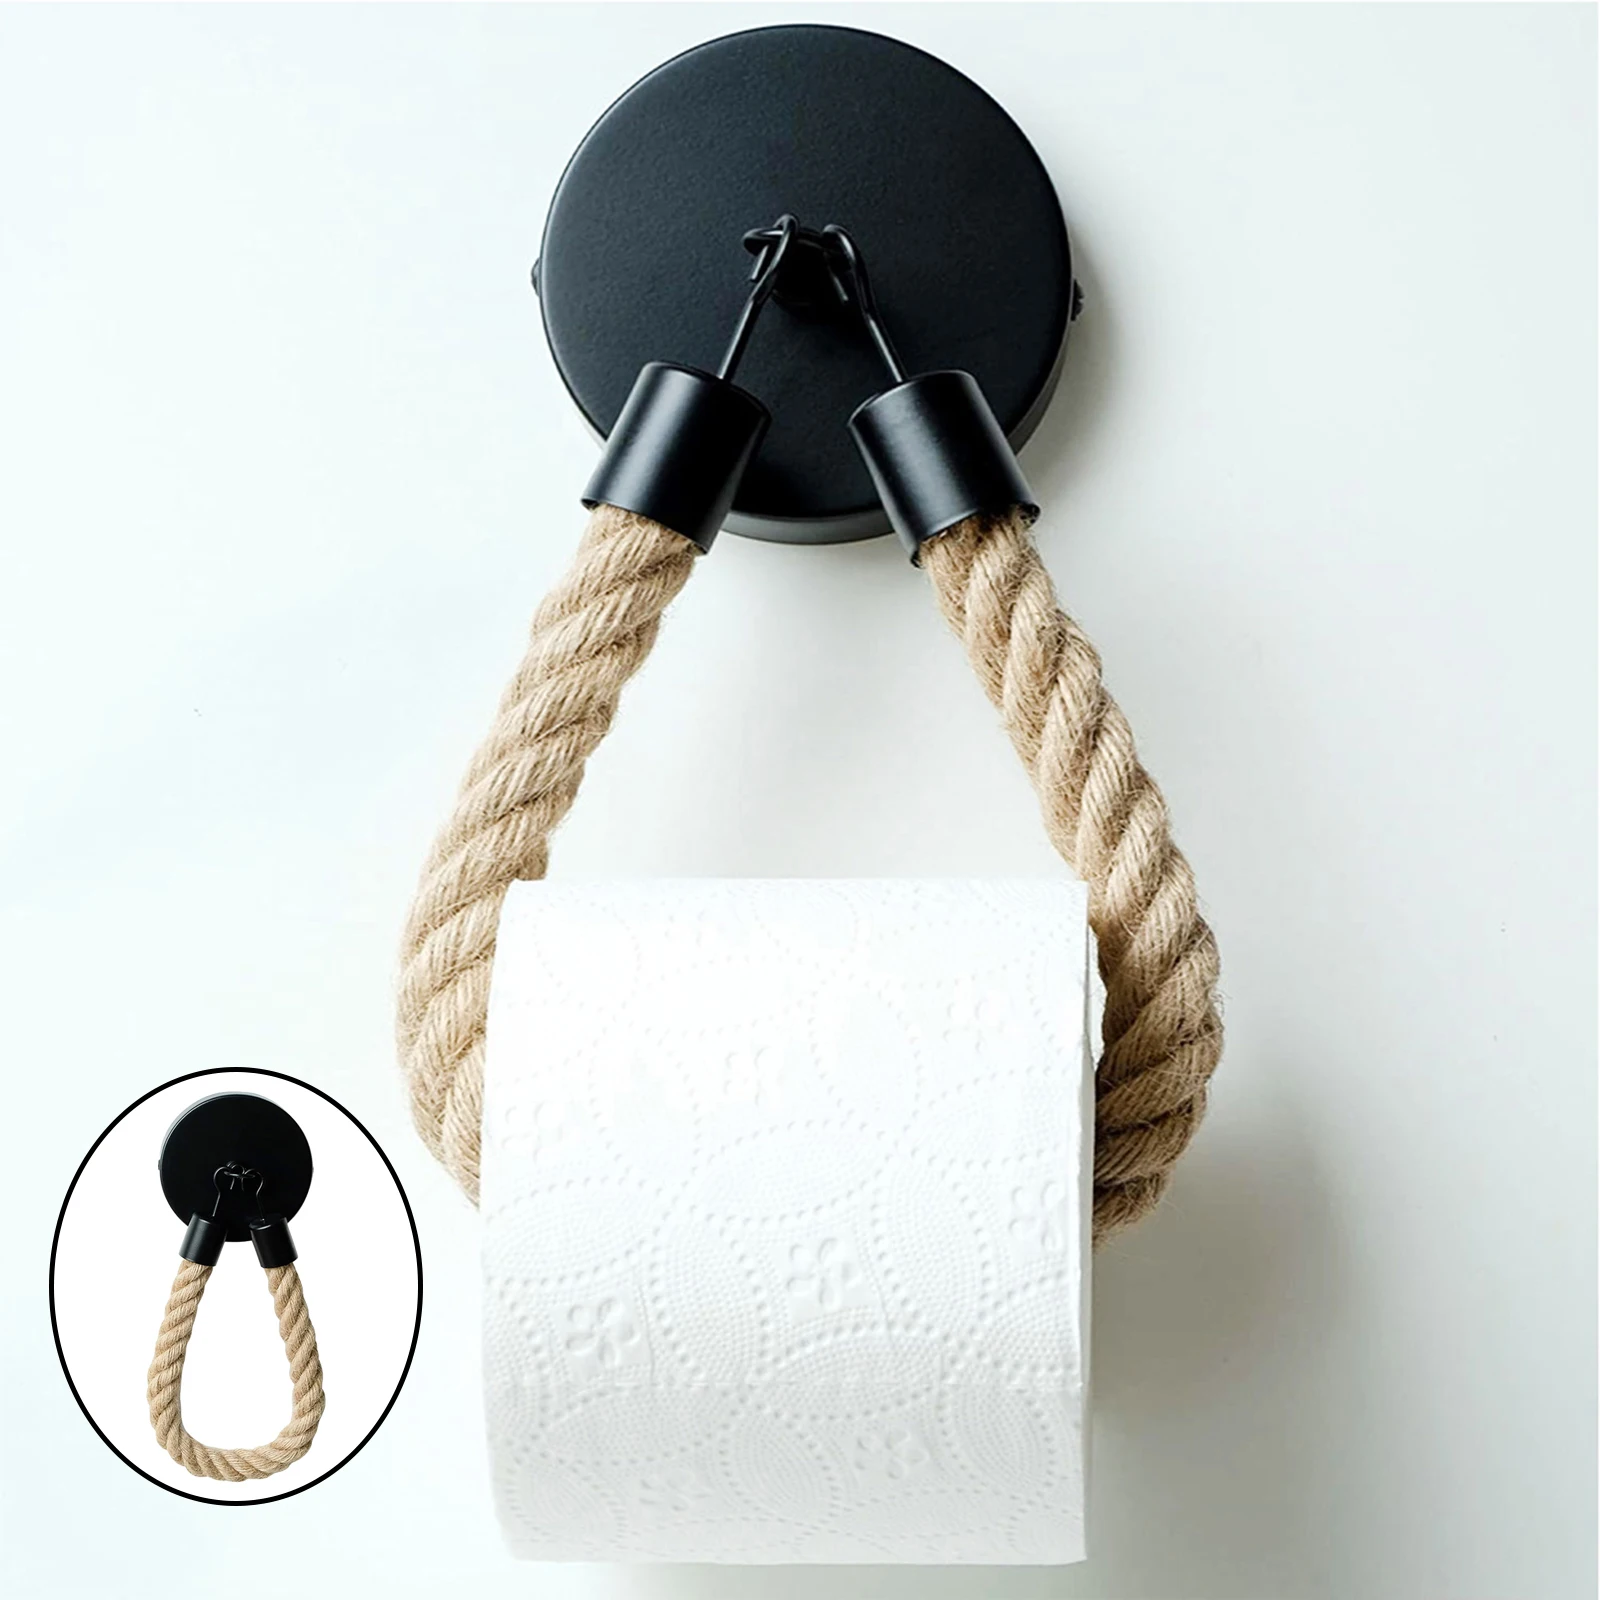 Wall Mounted Toilet Paper Roll Holder Bathroom Paper Roll Holder Wall Mount Hand Towel Holder Bathroom Toilet Paper Roll Holder